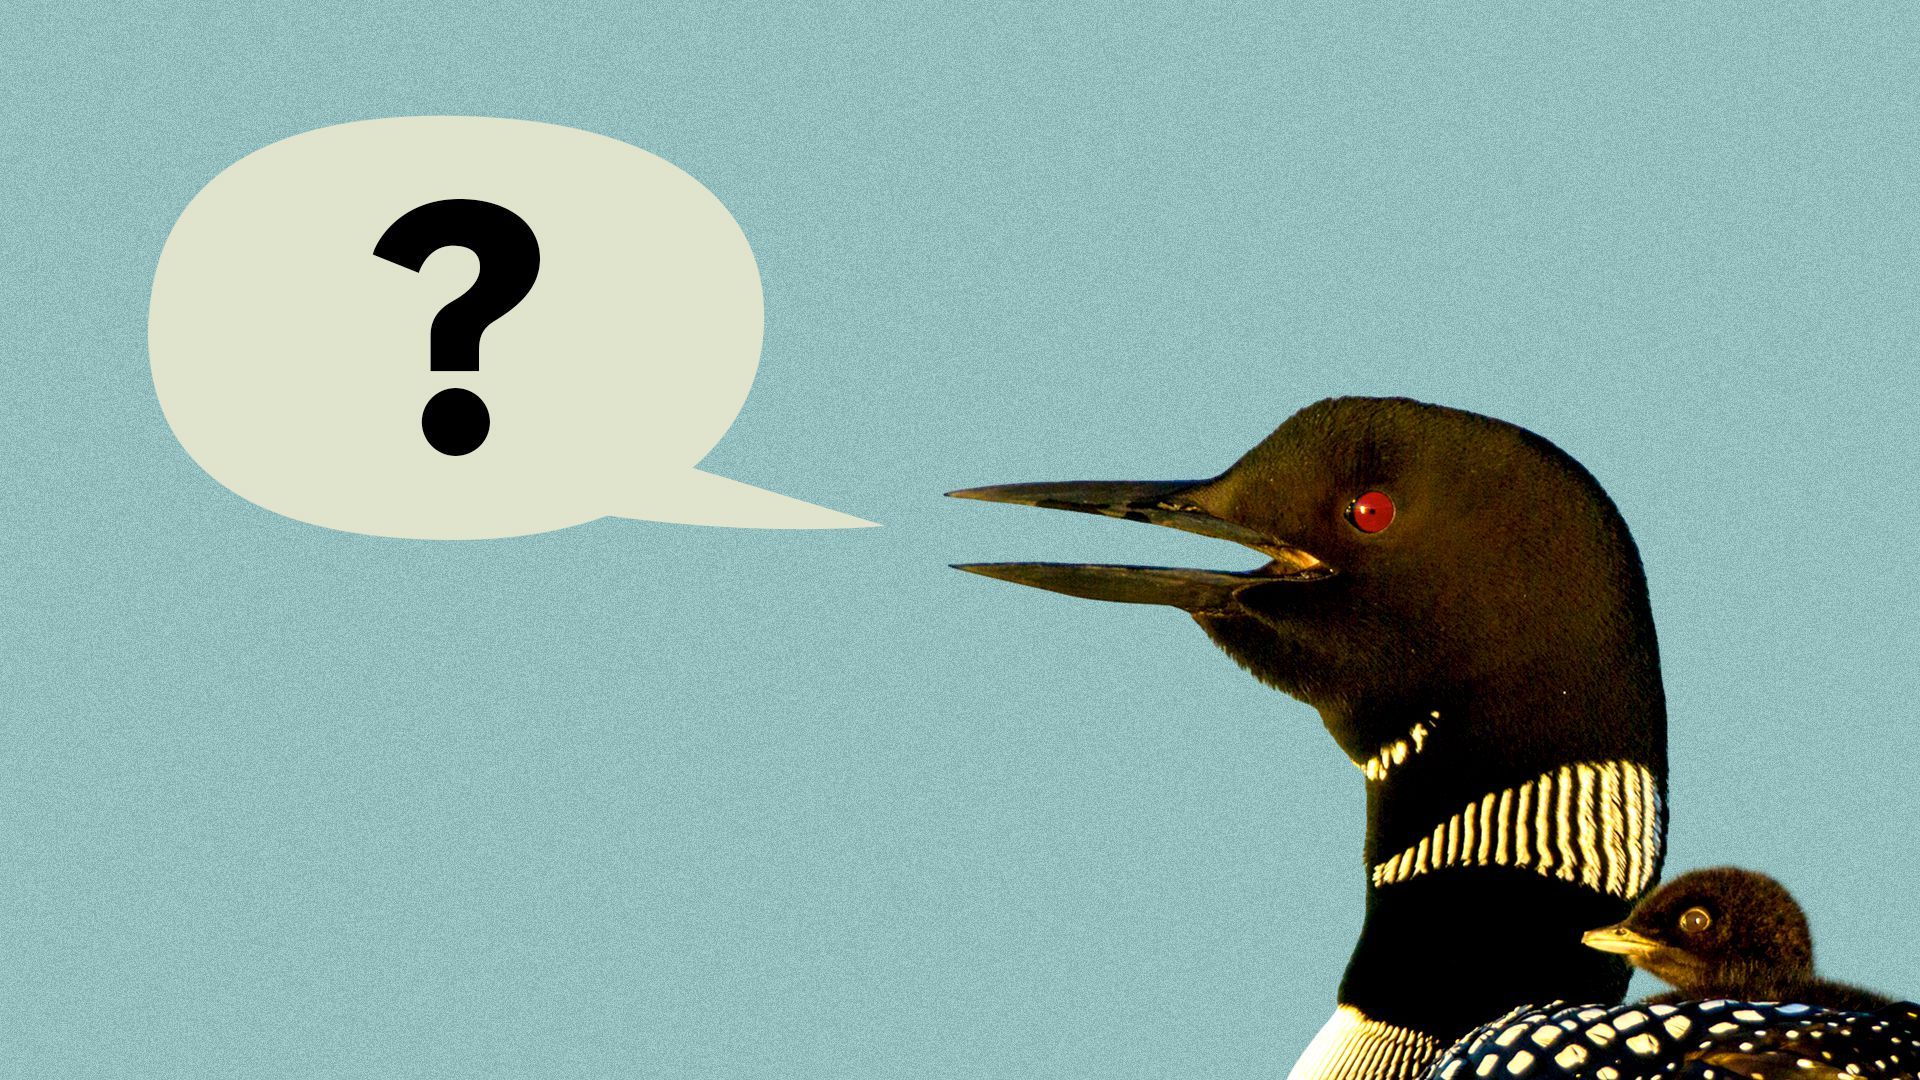 Illustration of a loon with a word balloon with a question mark coming out of its mouth.